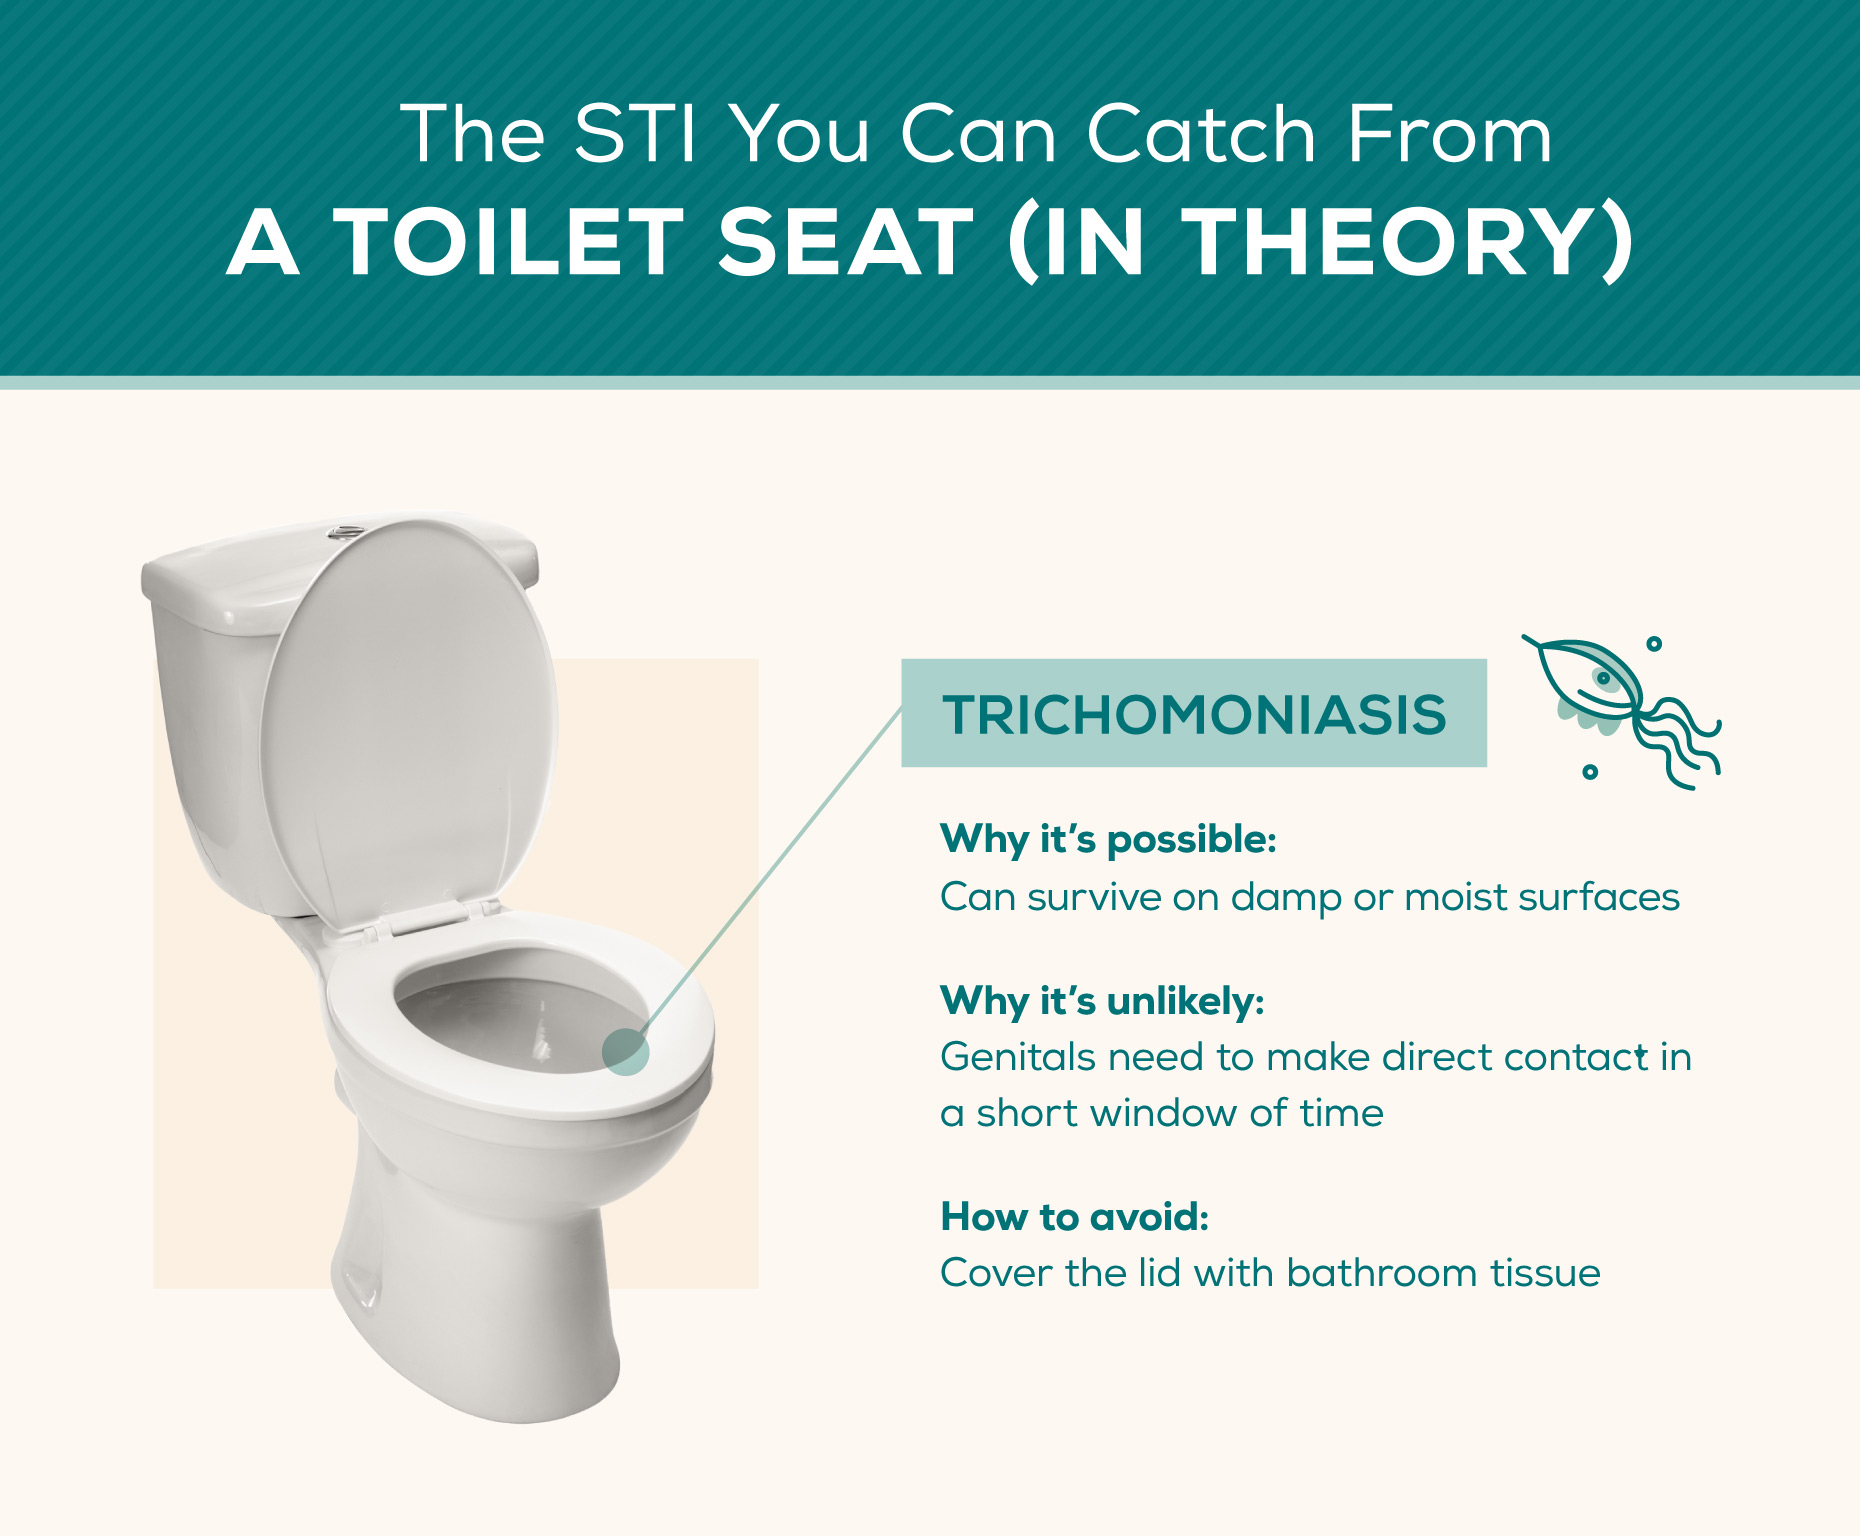 STI-you-can-catch-from-a-toilet-seat 